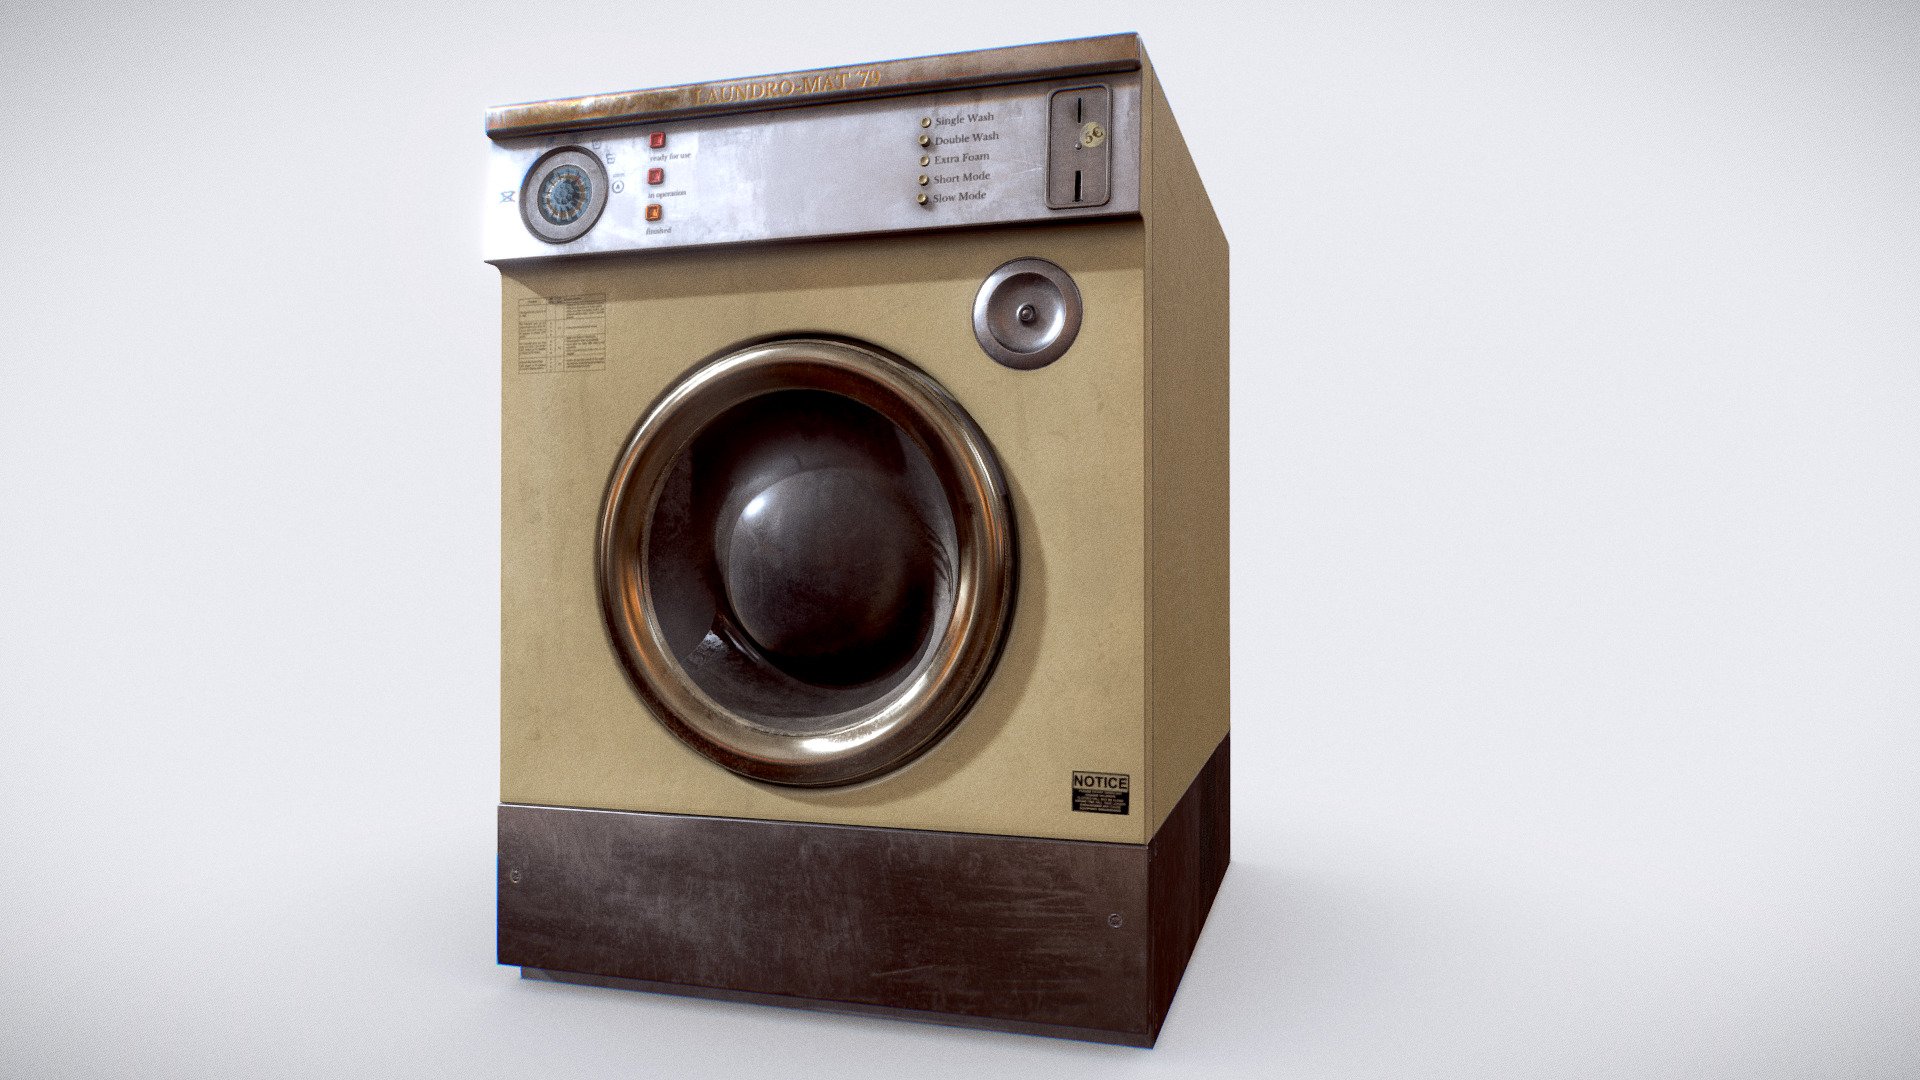 This is a game-ready washing machine from a laundry salon.
Modelled in Blender and textured with Substance Painter 3d model